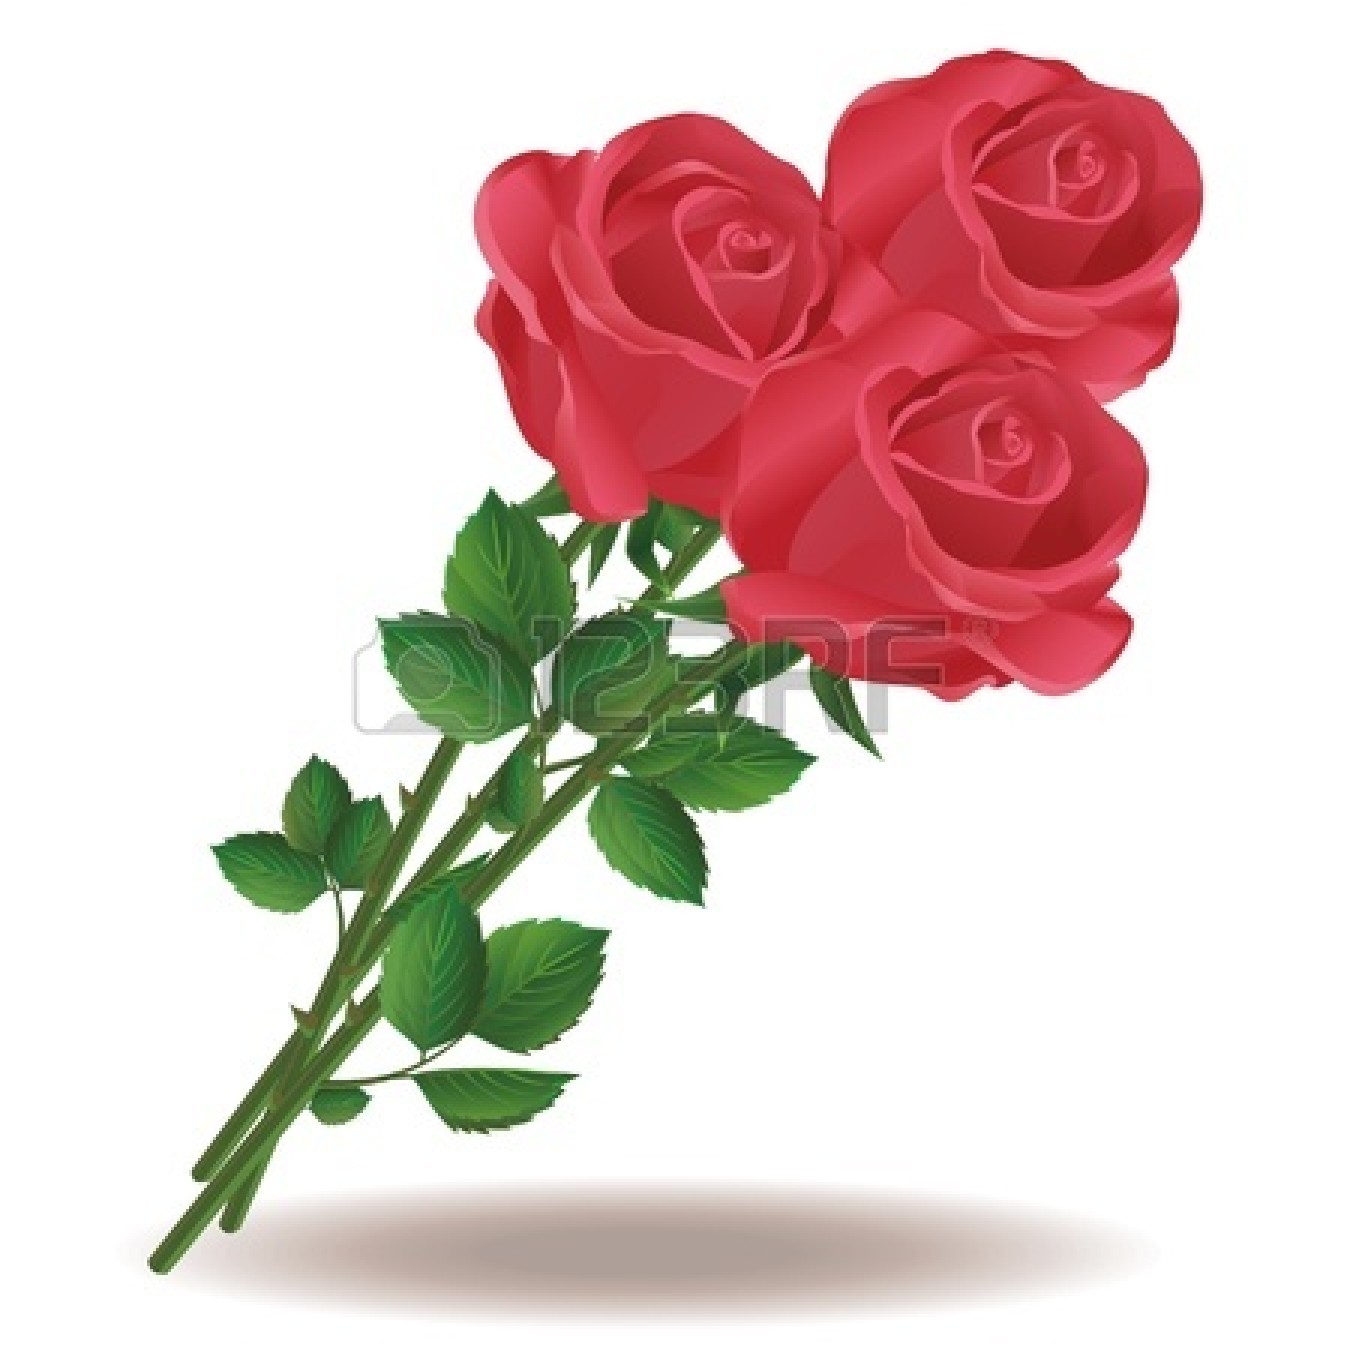 Clipart bouquet of red roses - ClipartFox